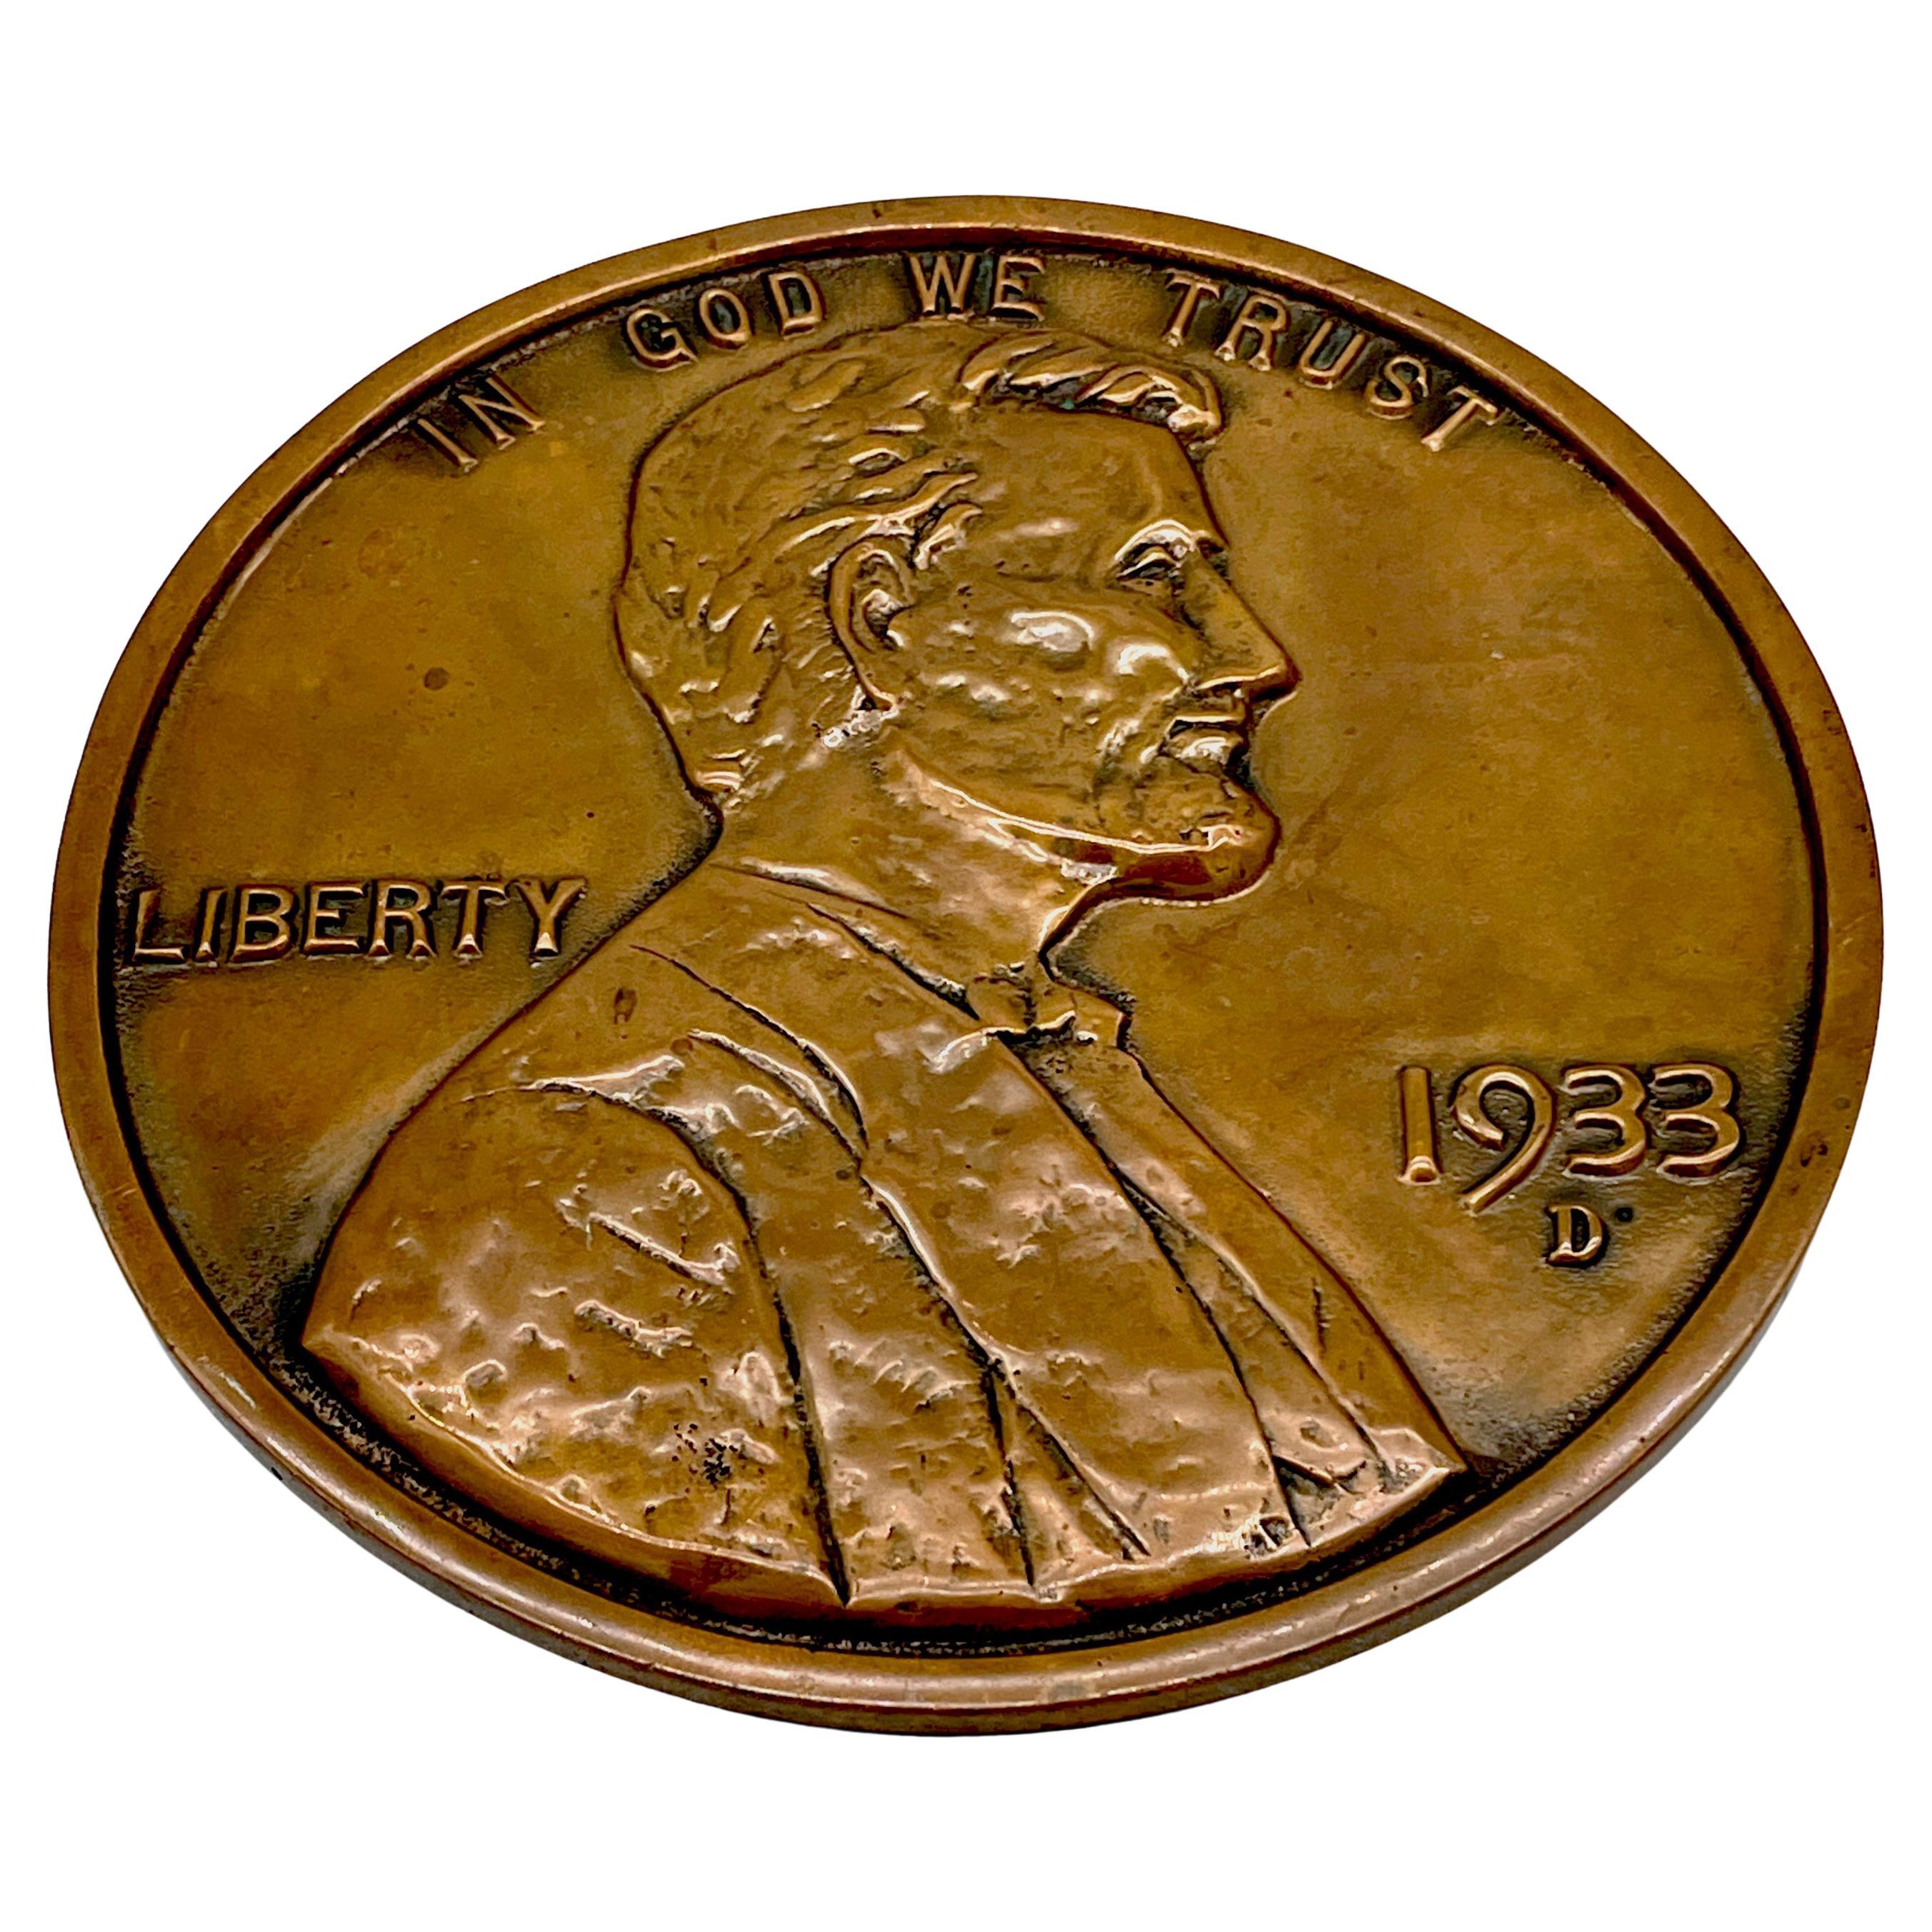 Maquette/Sculpture of Victor David Brenner's 1933 D Lincoln Penny Front/ Obverse For Sale